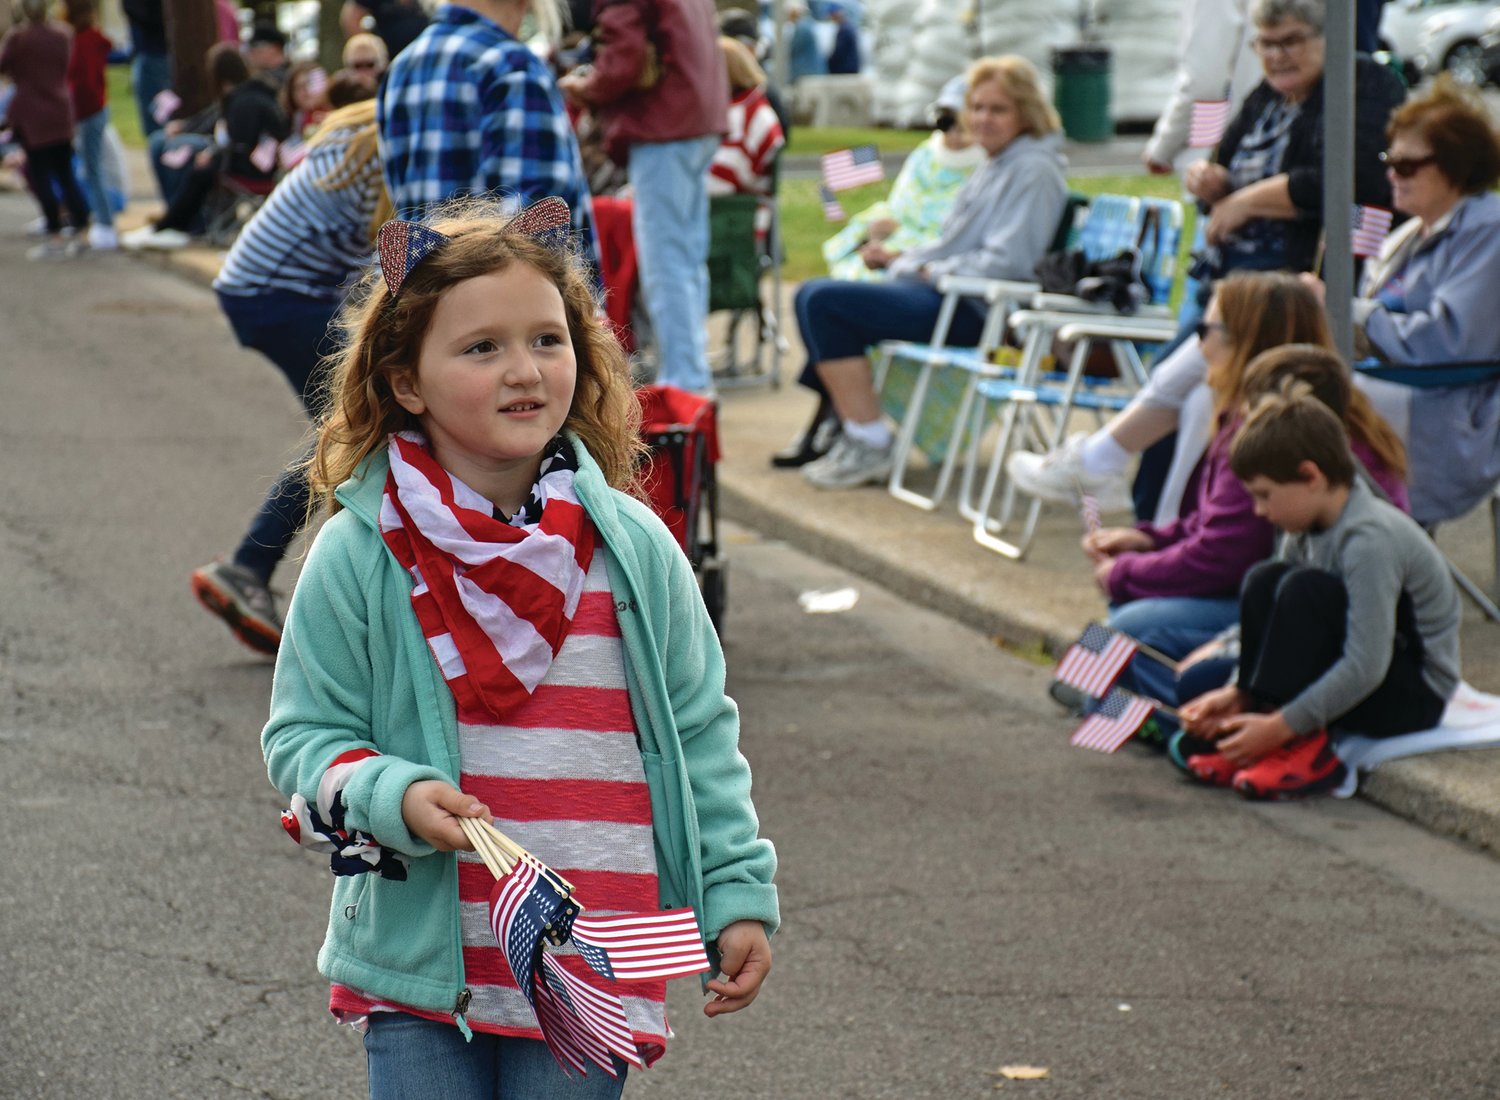 A young participant carries flags to give away.